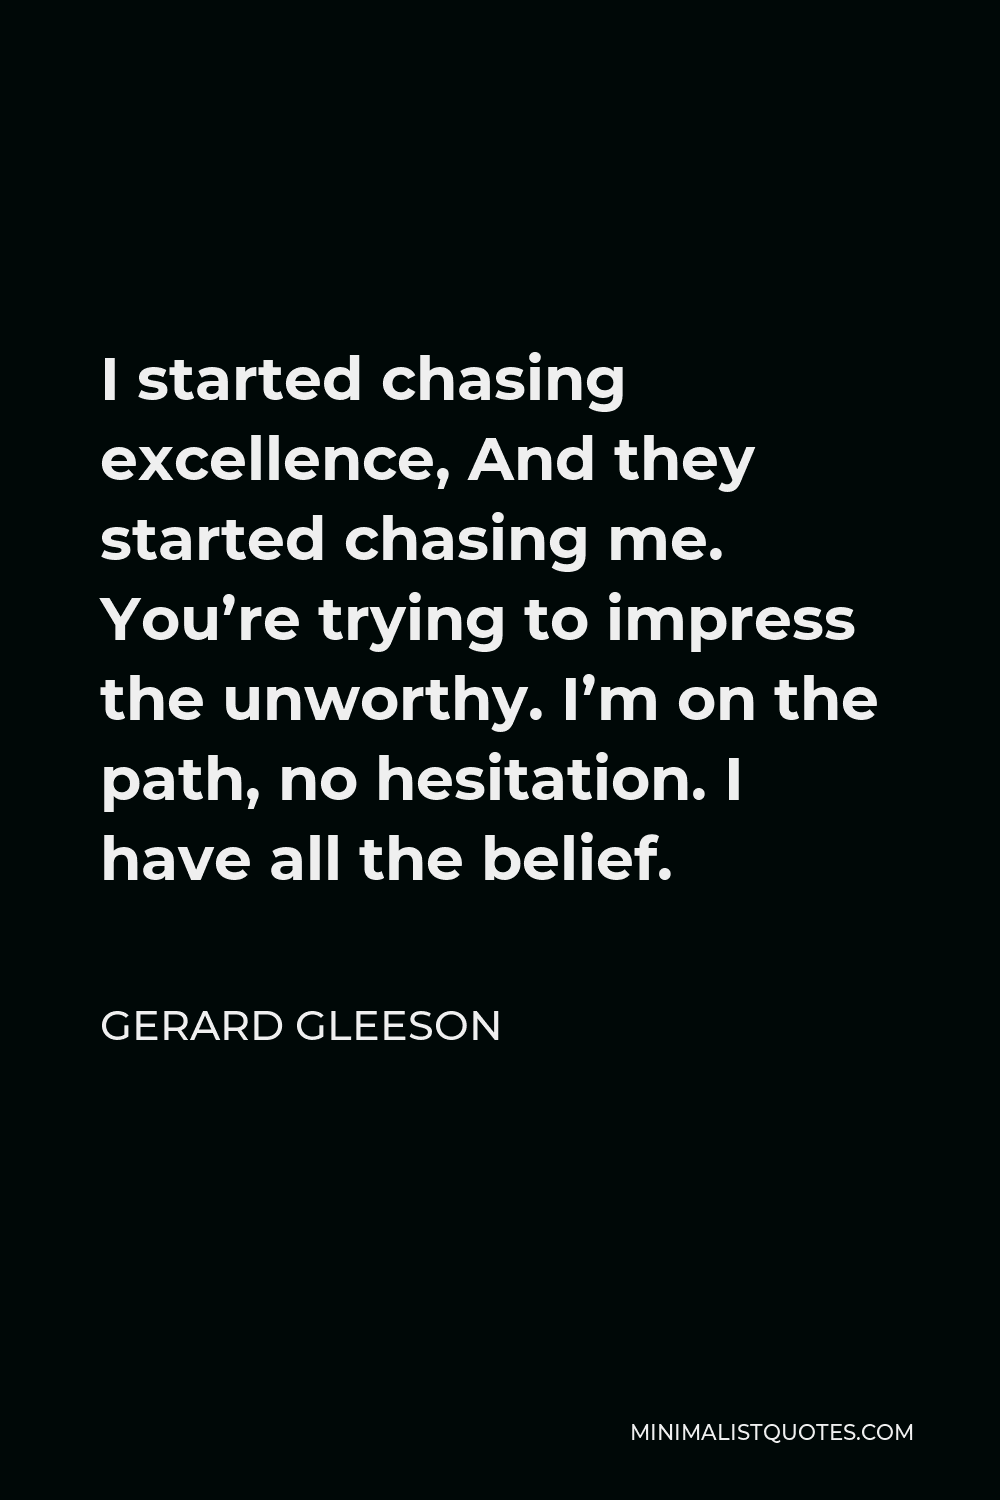 Gerard Gleeson Quote - I started chasing excellence, And they started chasing me. You’re trying to impress the unworthy. I’m on the path, no hesitation. I have all the belief.